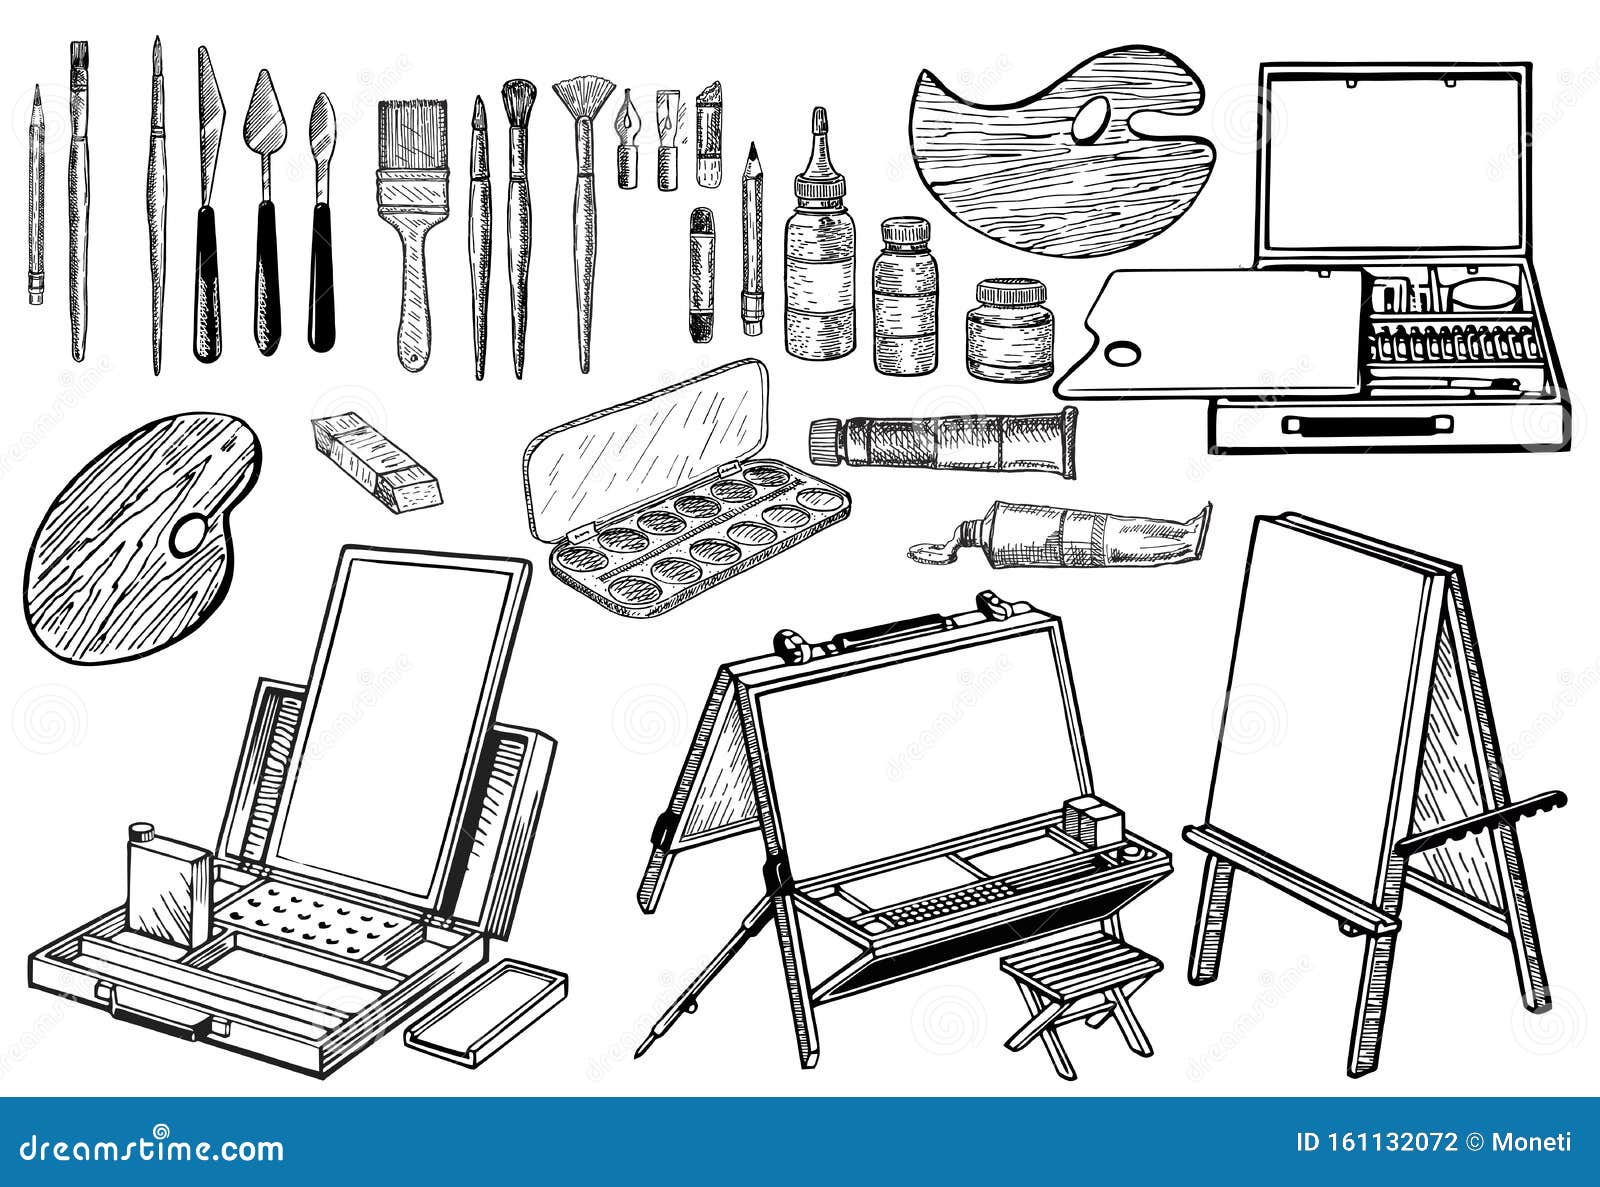 Hand Drawn Art Tools and Supplies Set. Sketch. Painting Tools